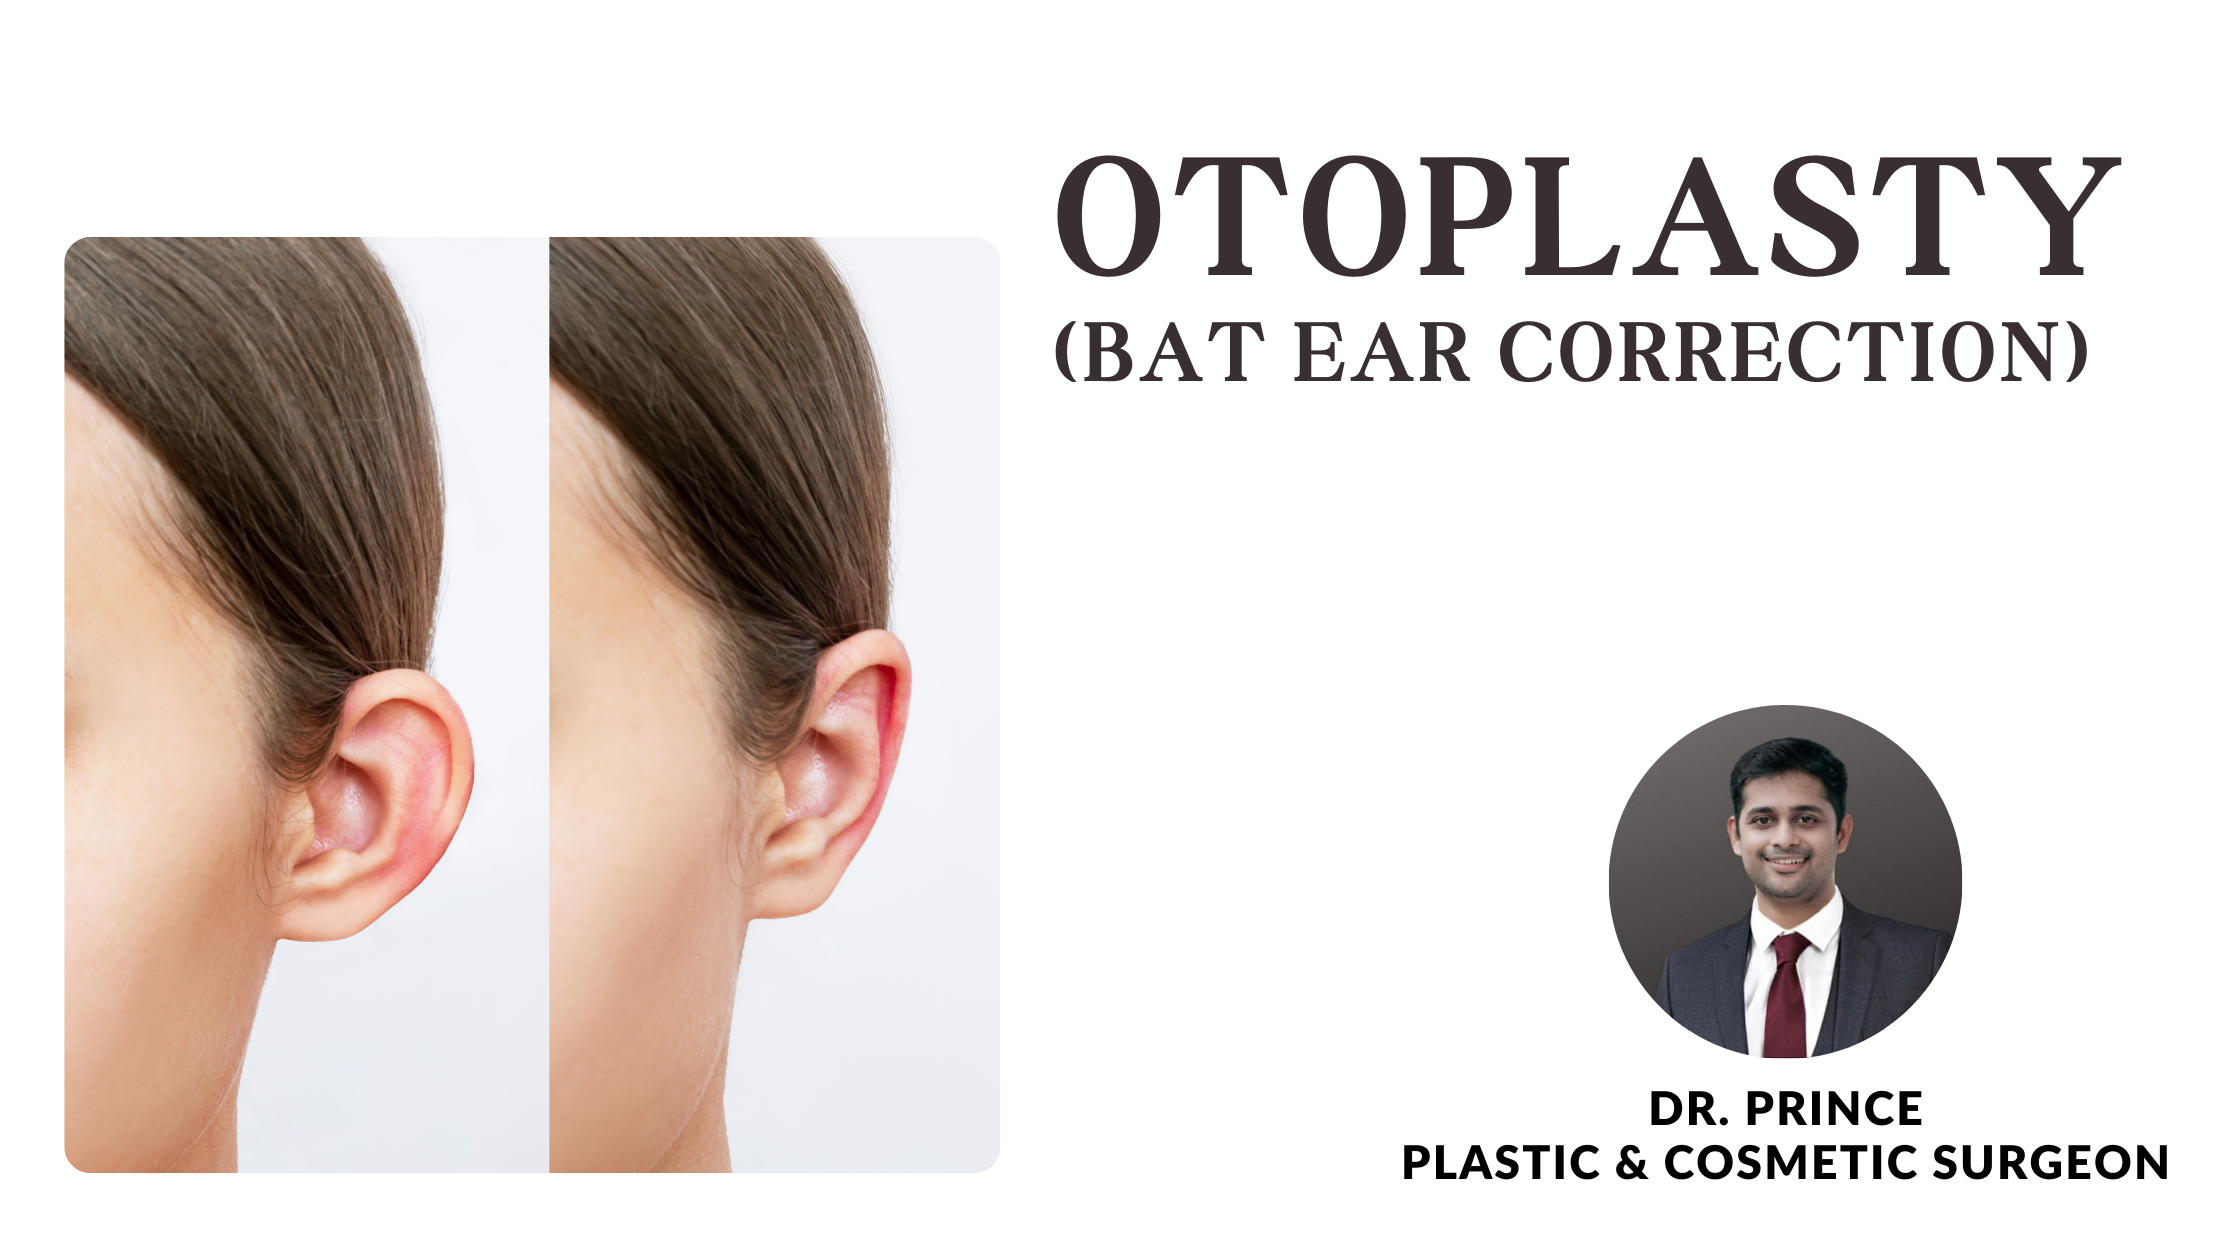 Dr. Prince performs otoplasty, sculpting natural and harmonious ear contours for enhanced aesthetics.